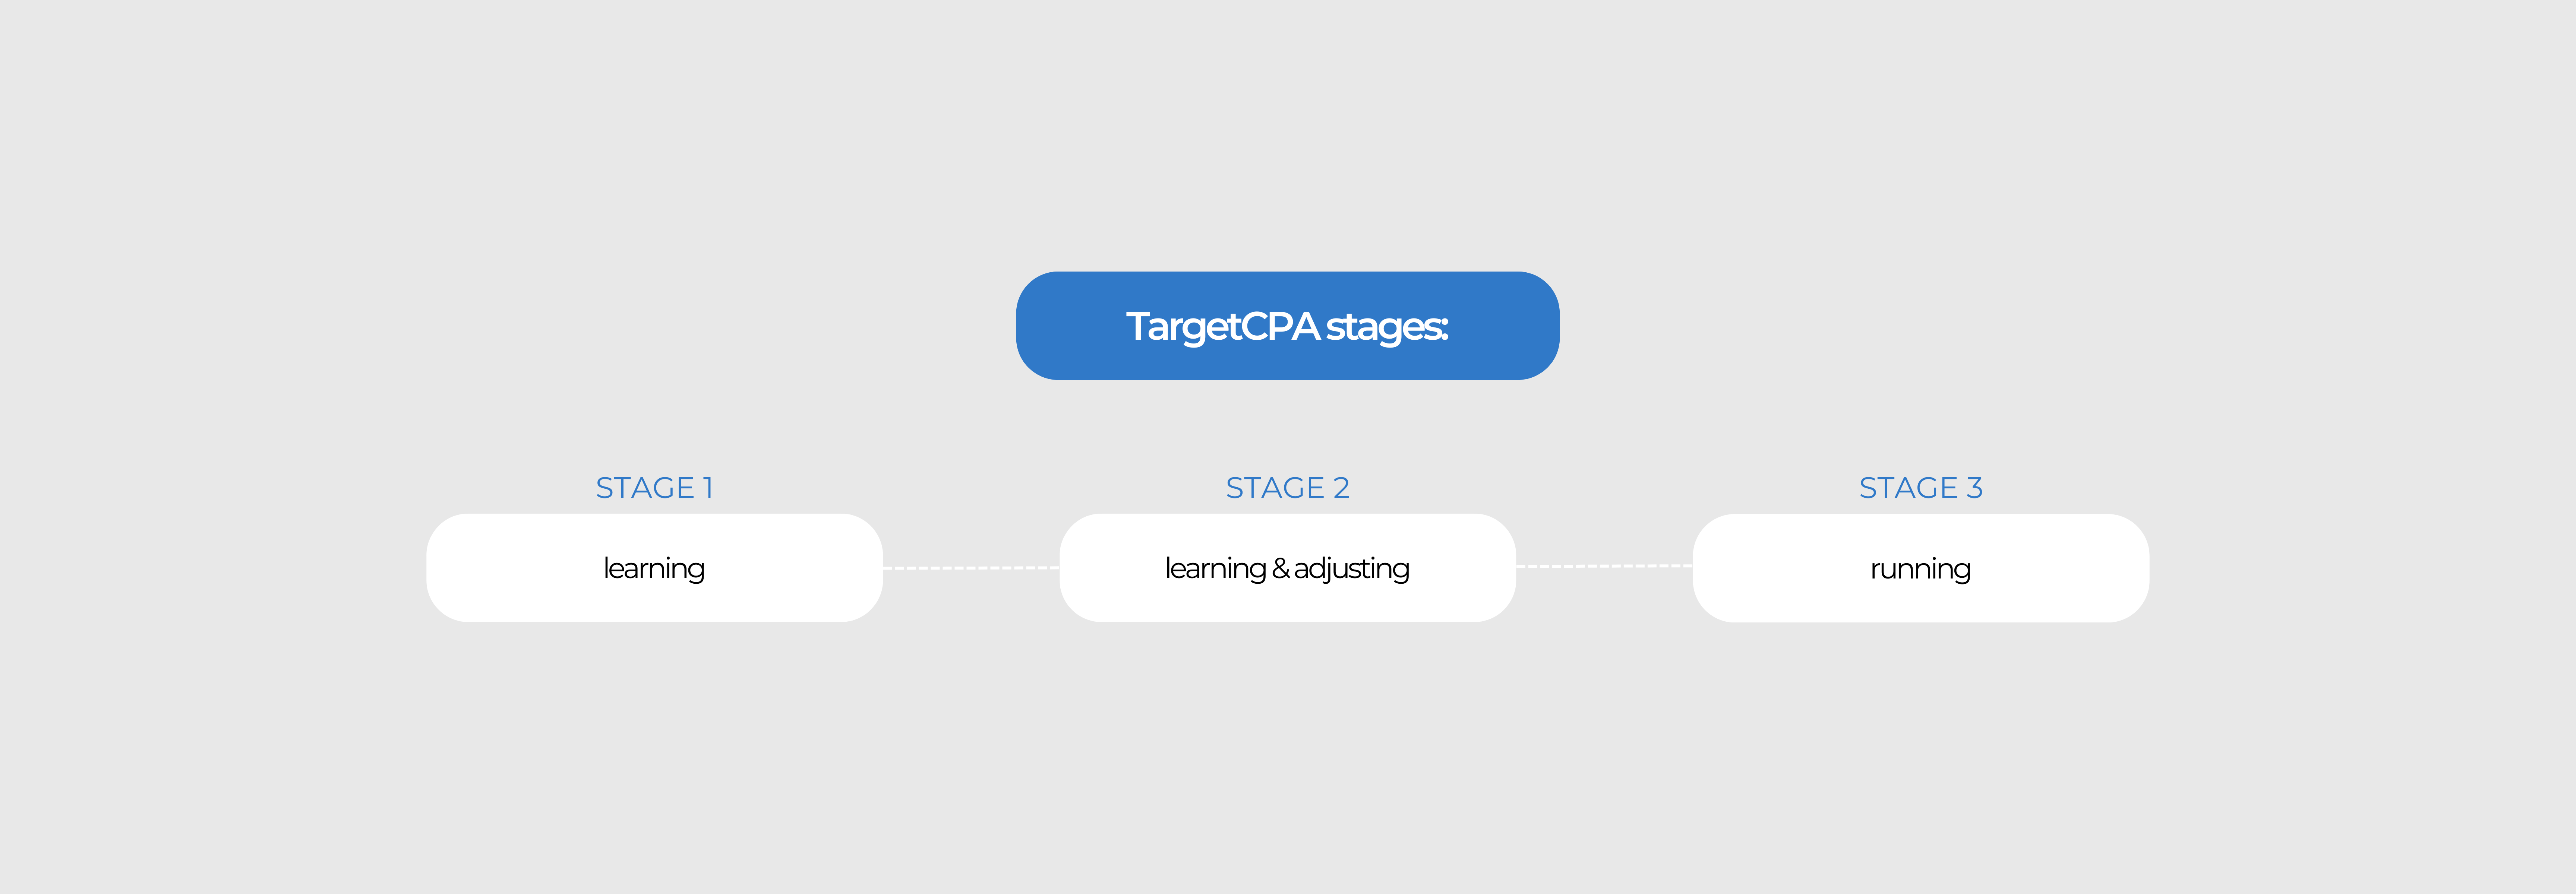 TagetCPA's stages